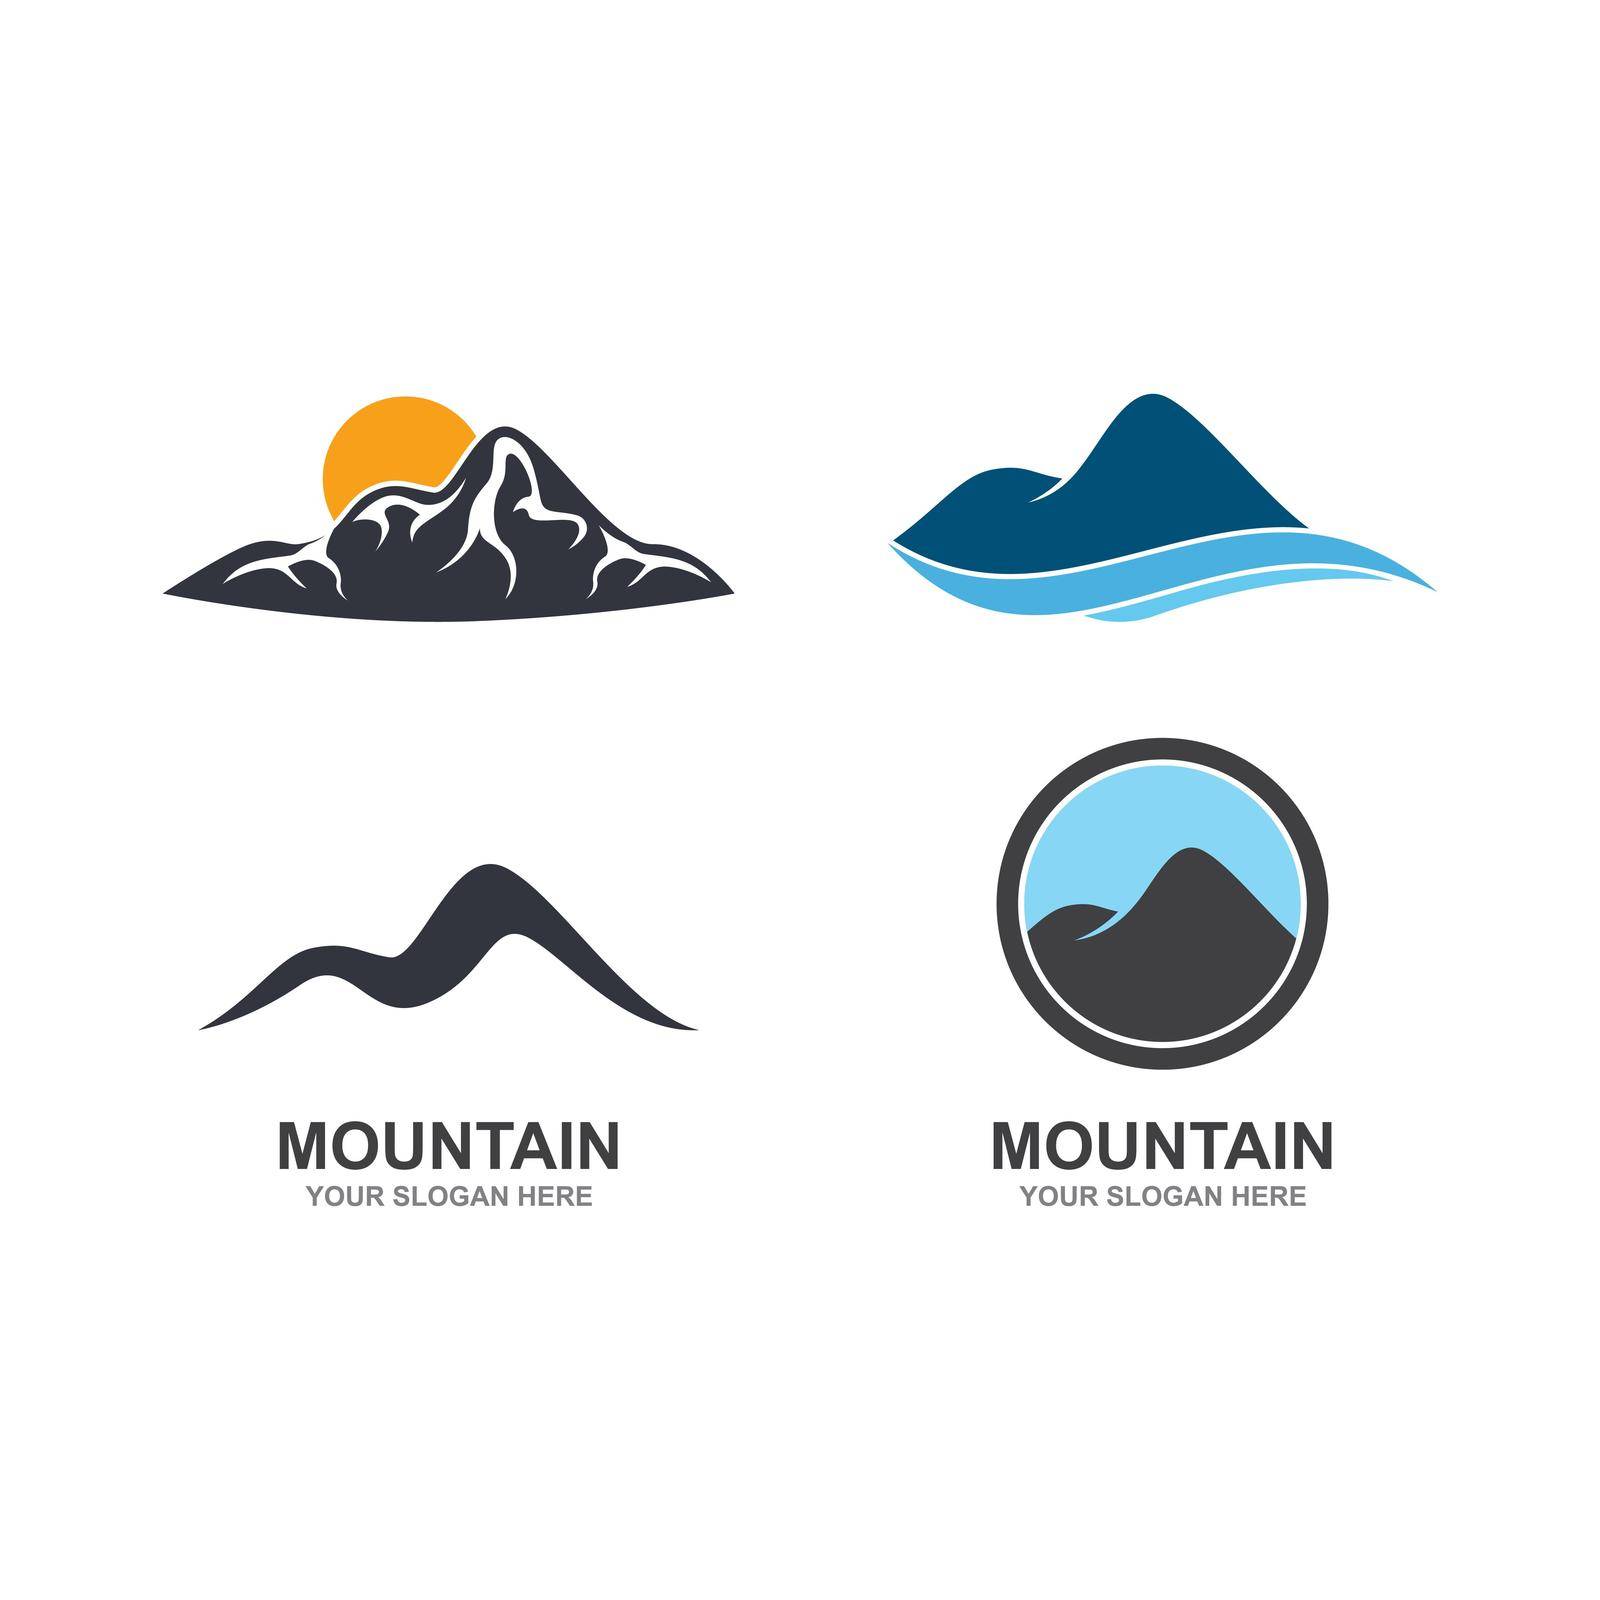 Mountain illustration by awk